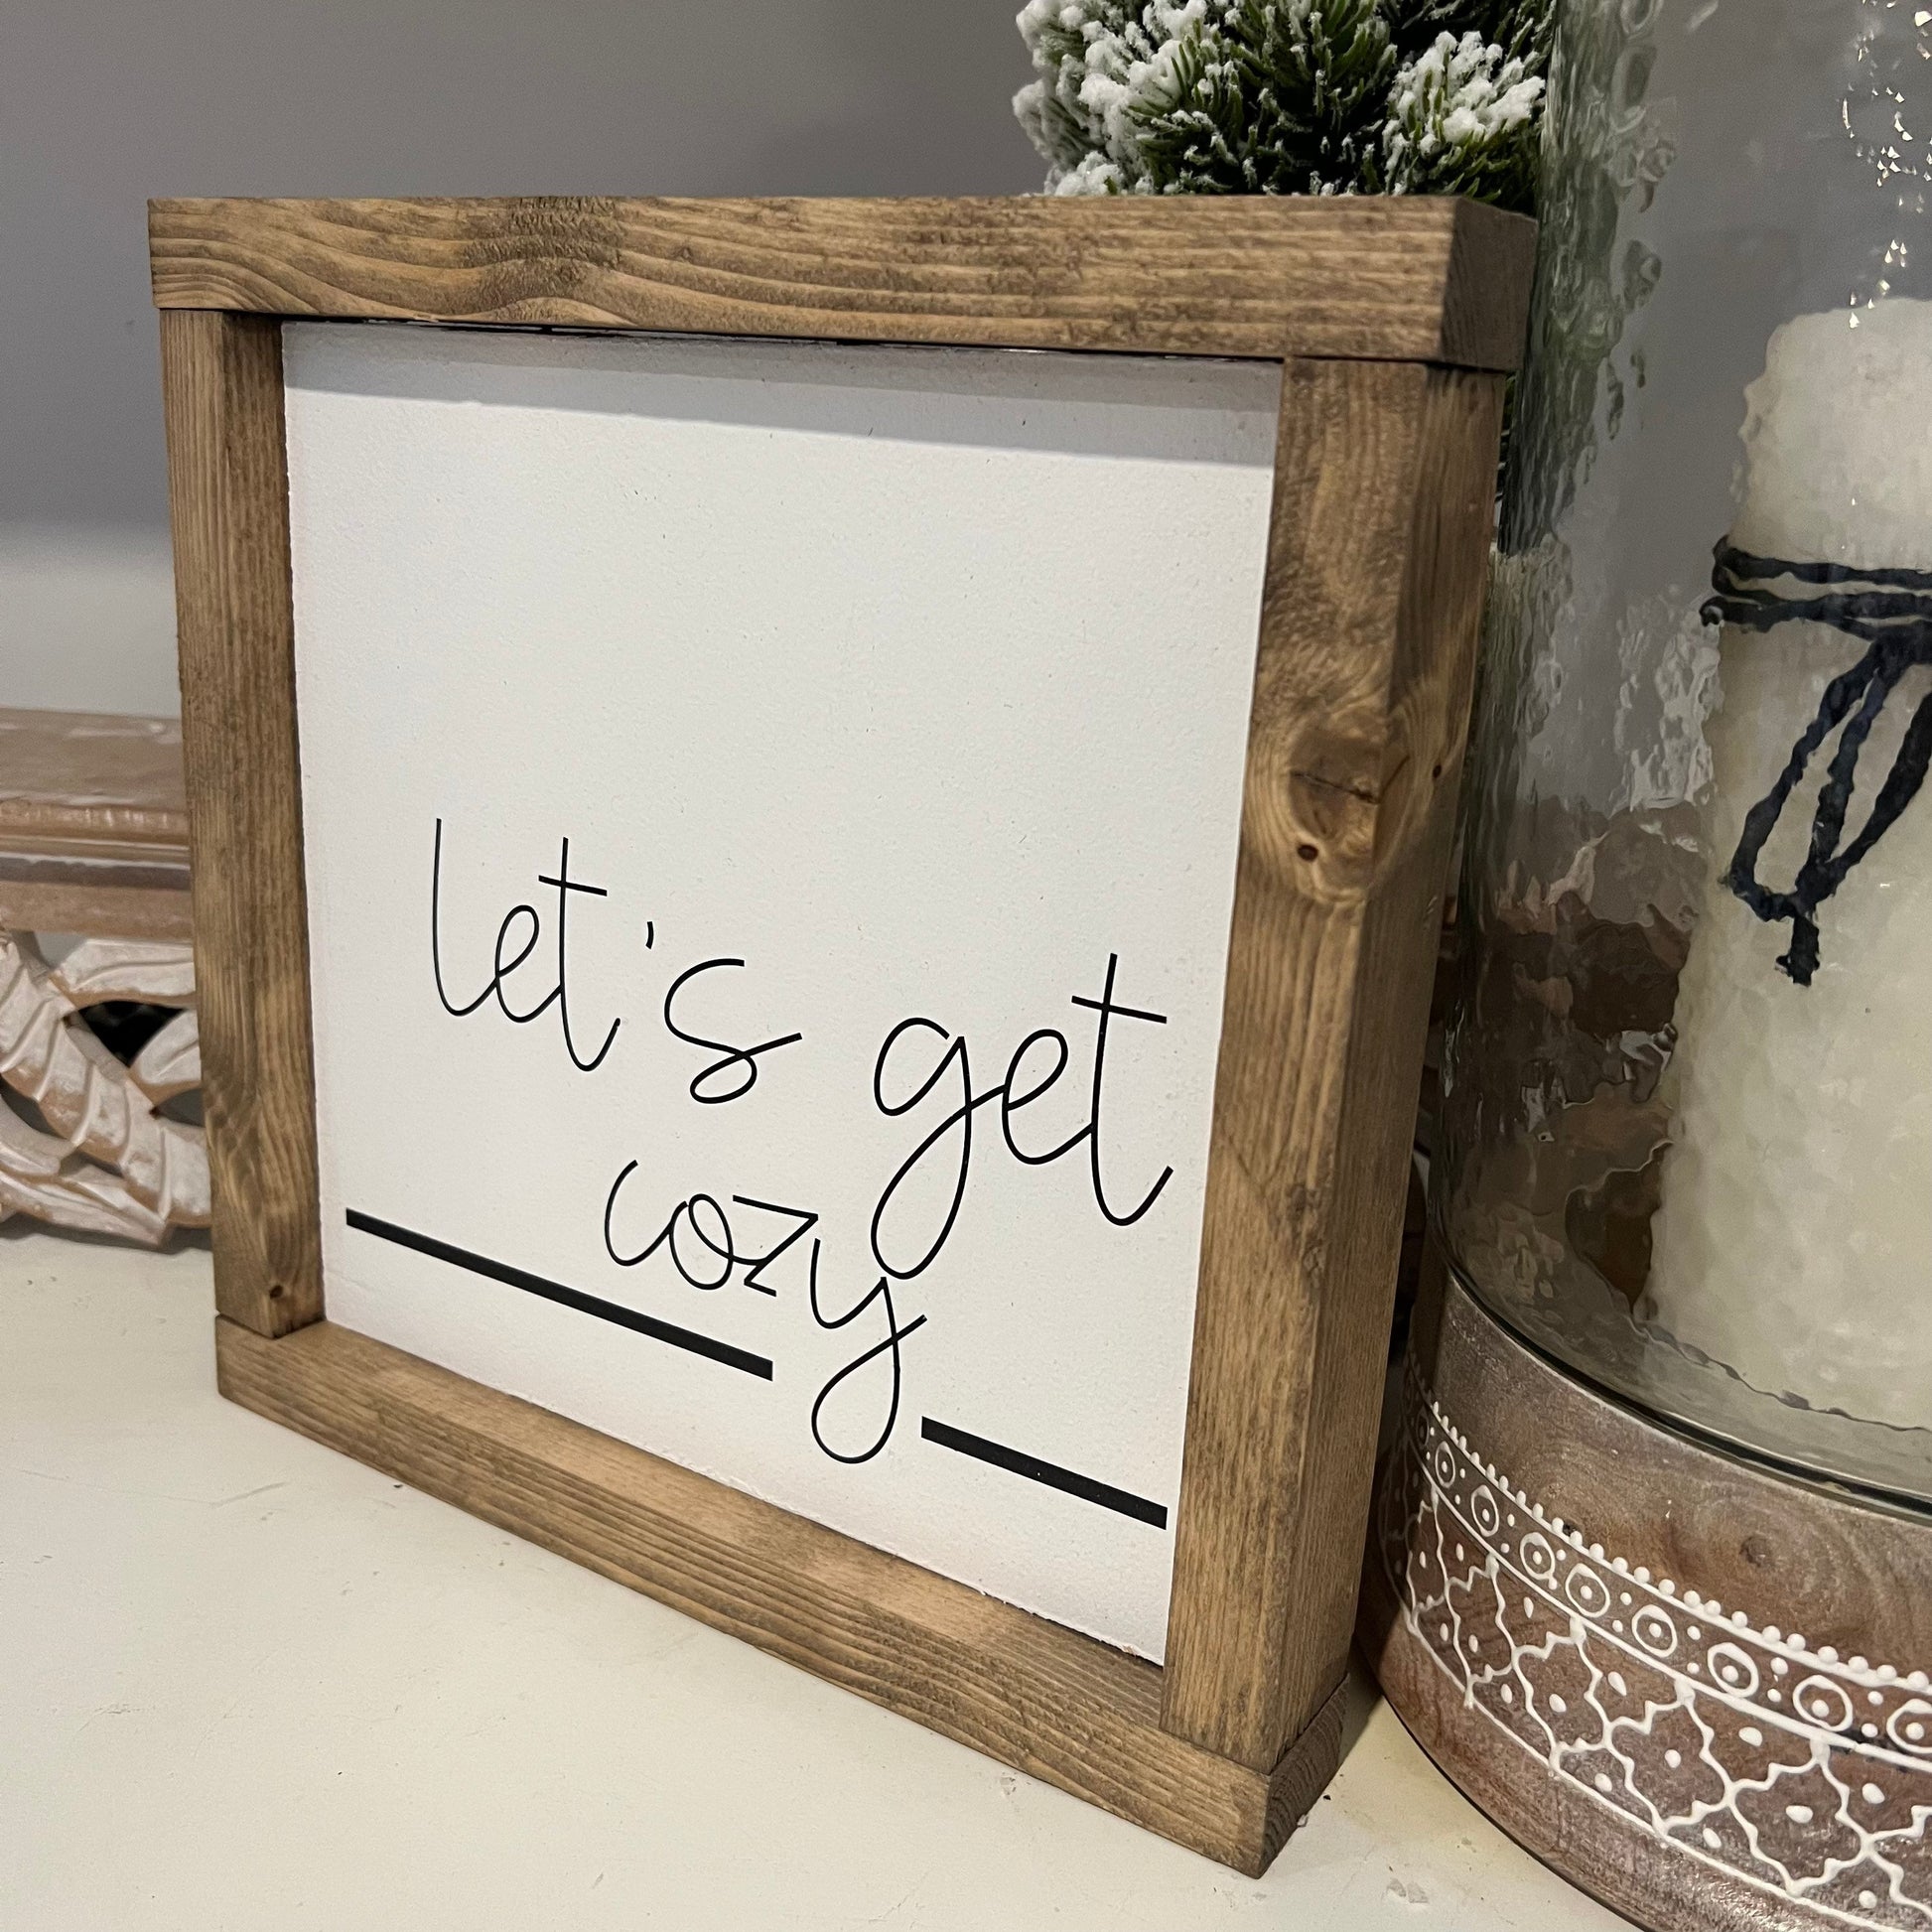 let’s get cozy - entryway, living room sign [FREE SHIPPING!]